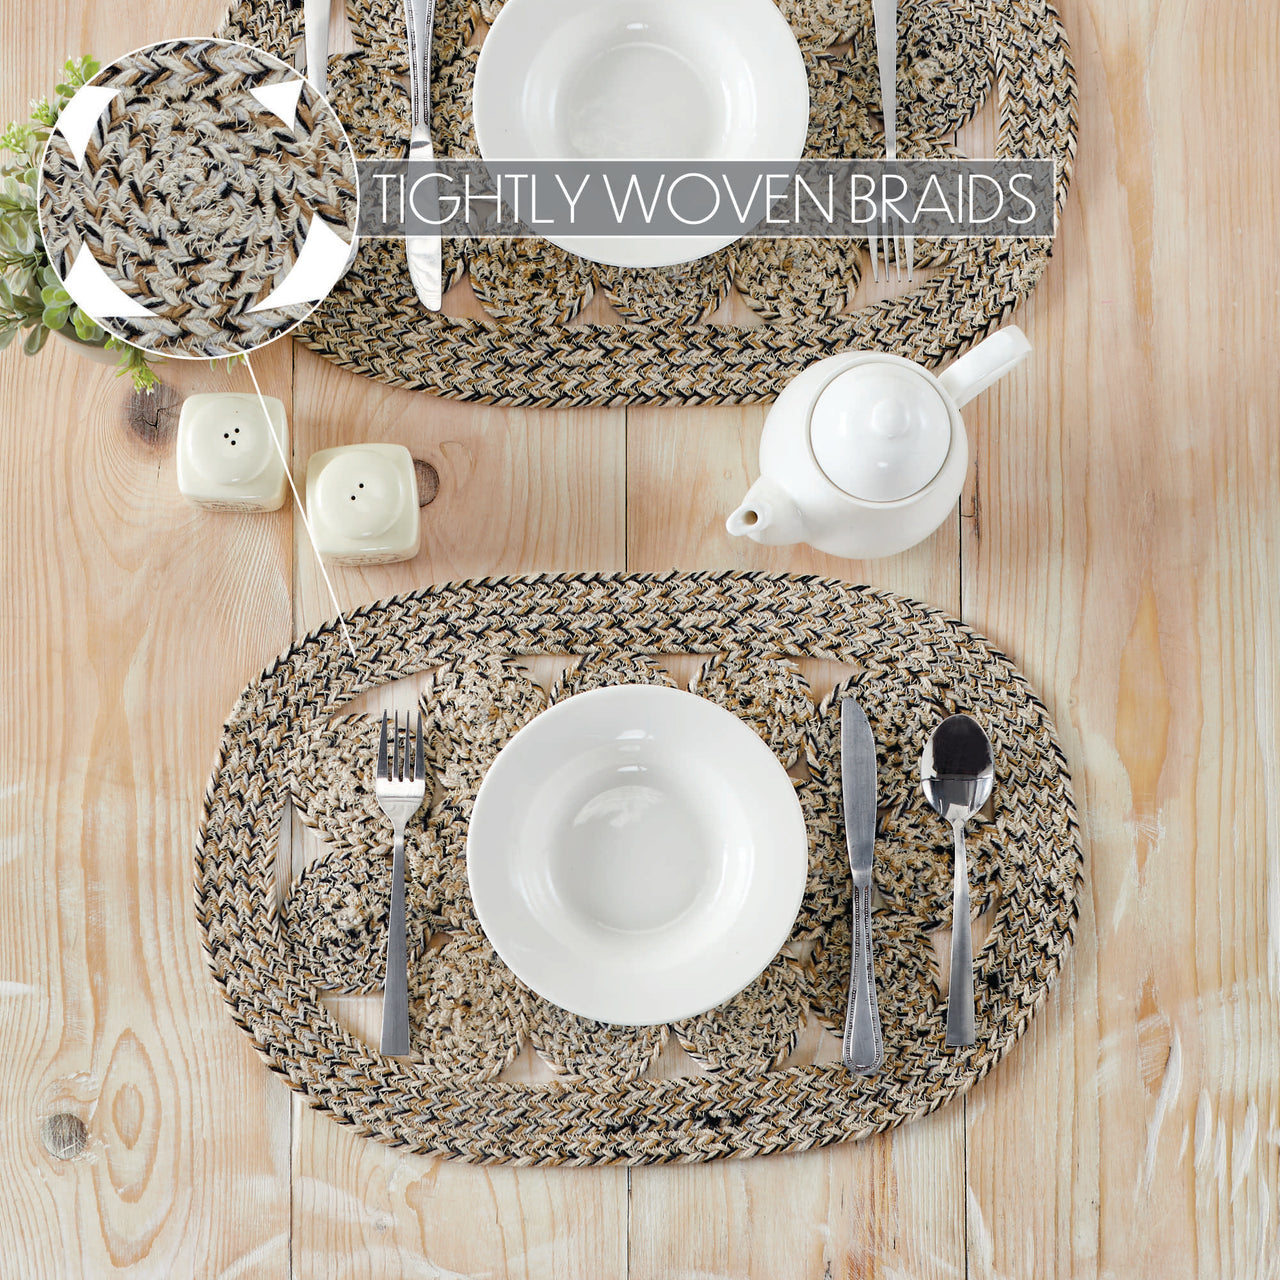 Celeste Blended Pebble Indoor/Outdoor Braided Placemat 13"x19" VHC Brands